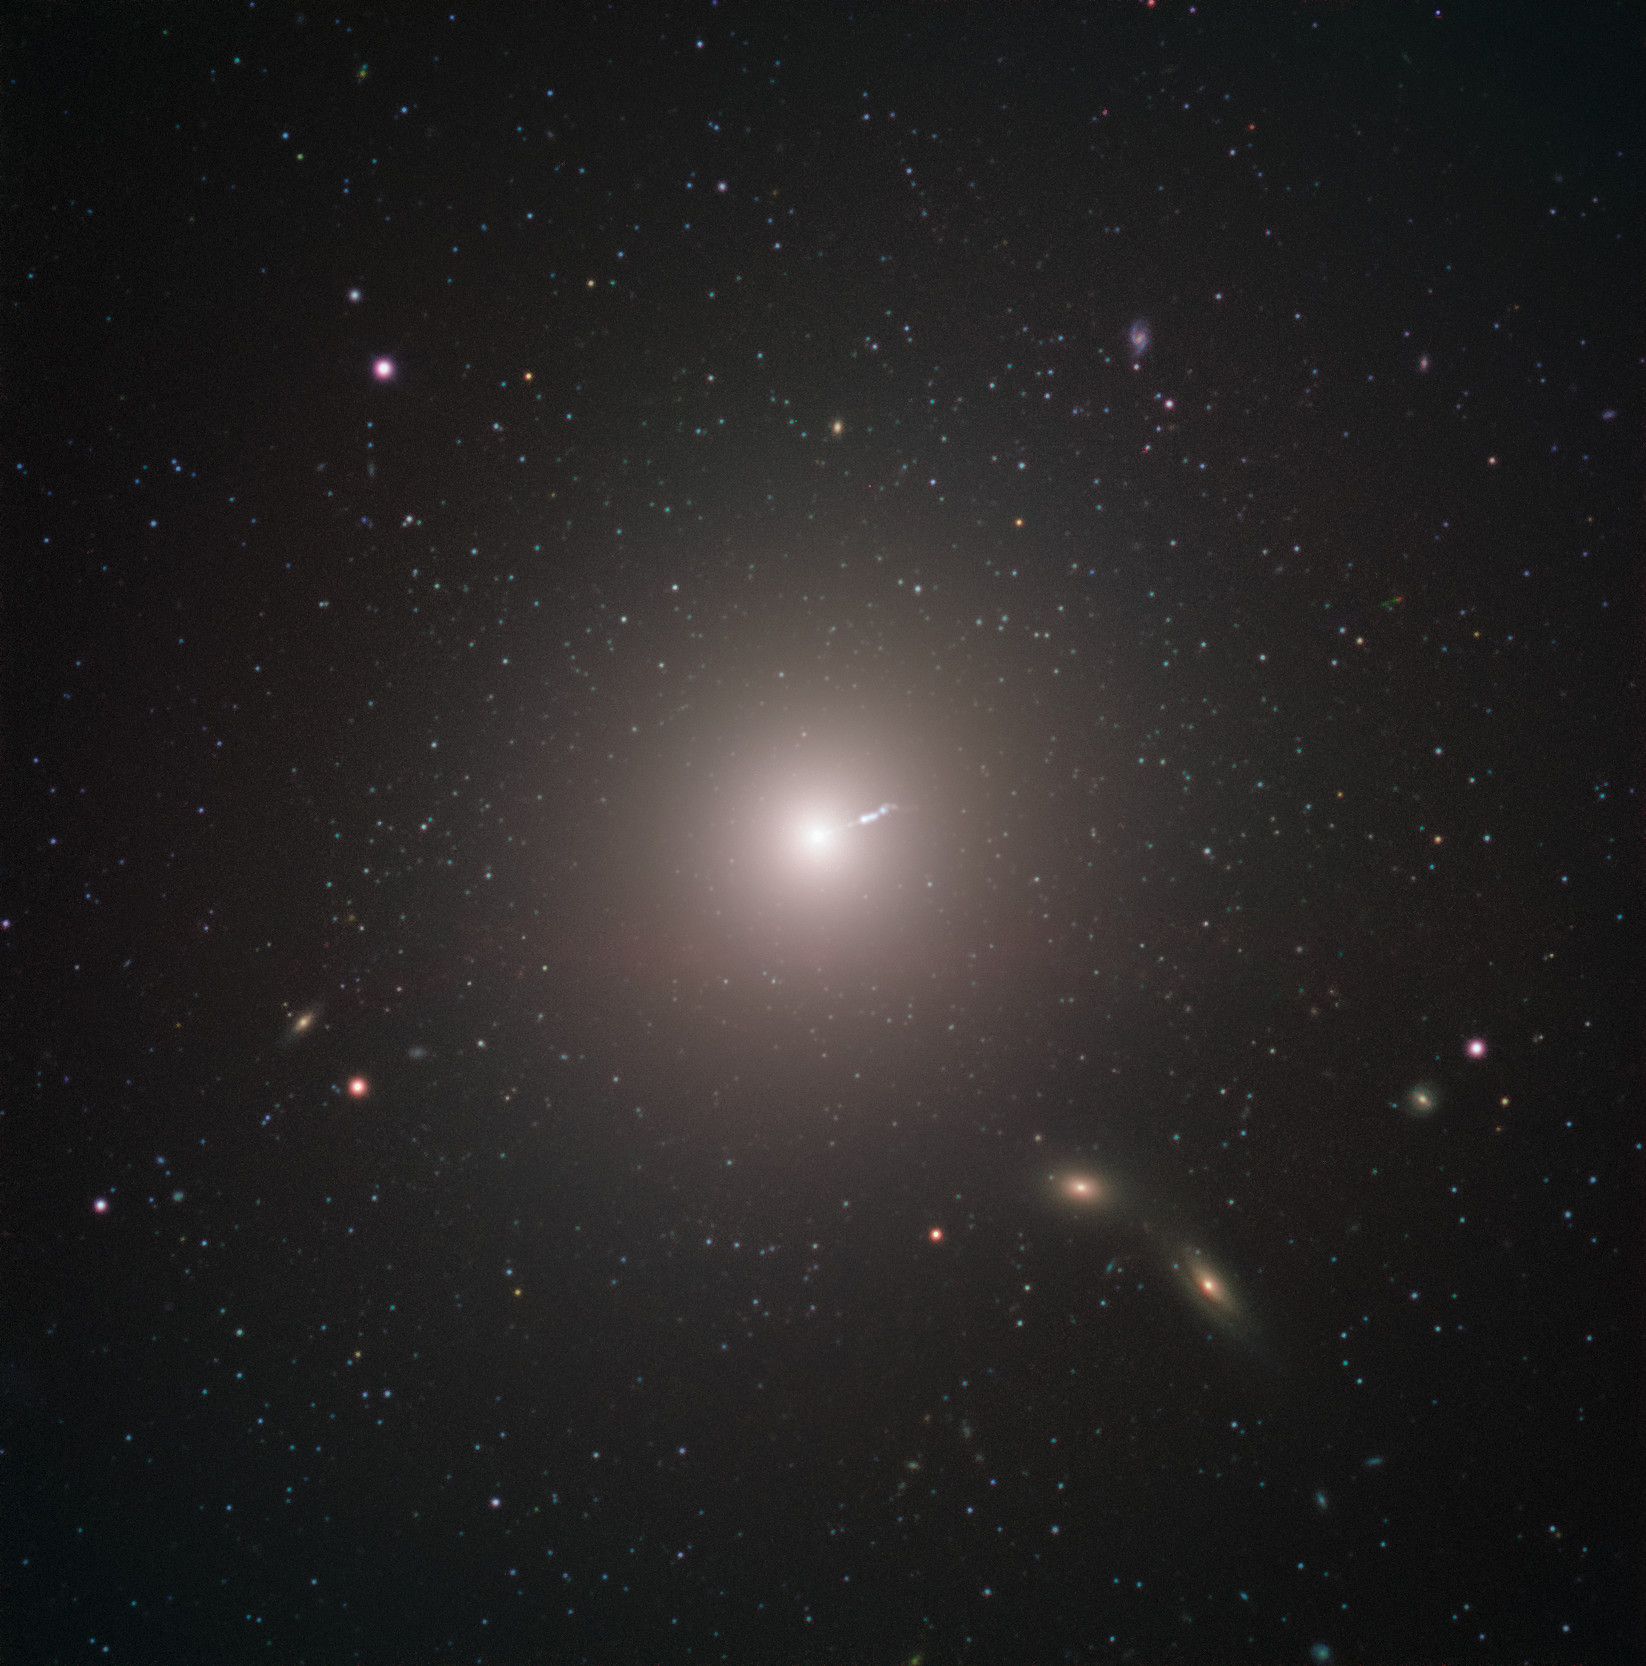 Messier 87 Captured by ESO’s Very Large Telescope. Credit: ESO